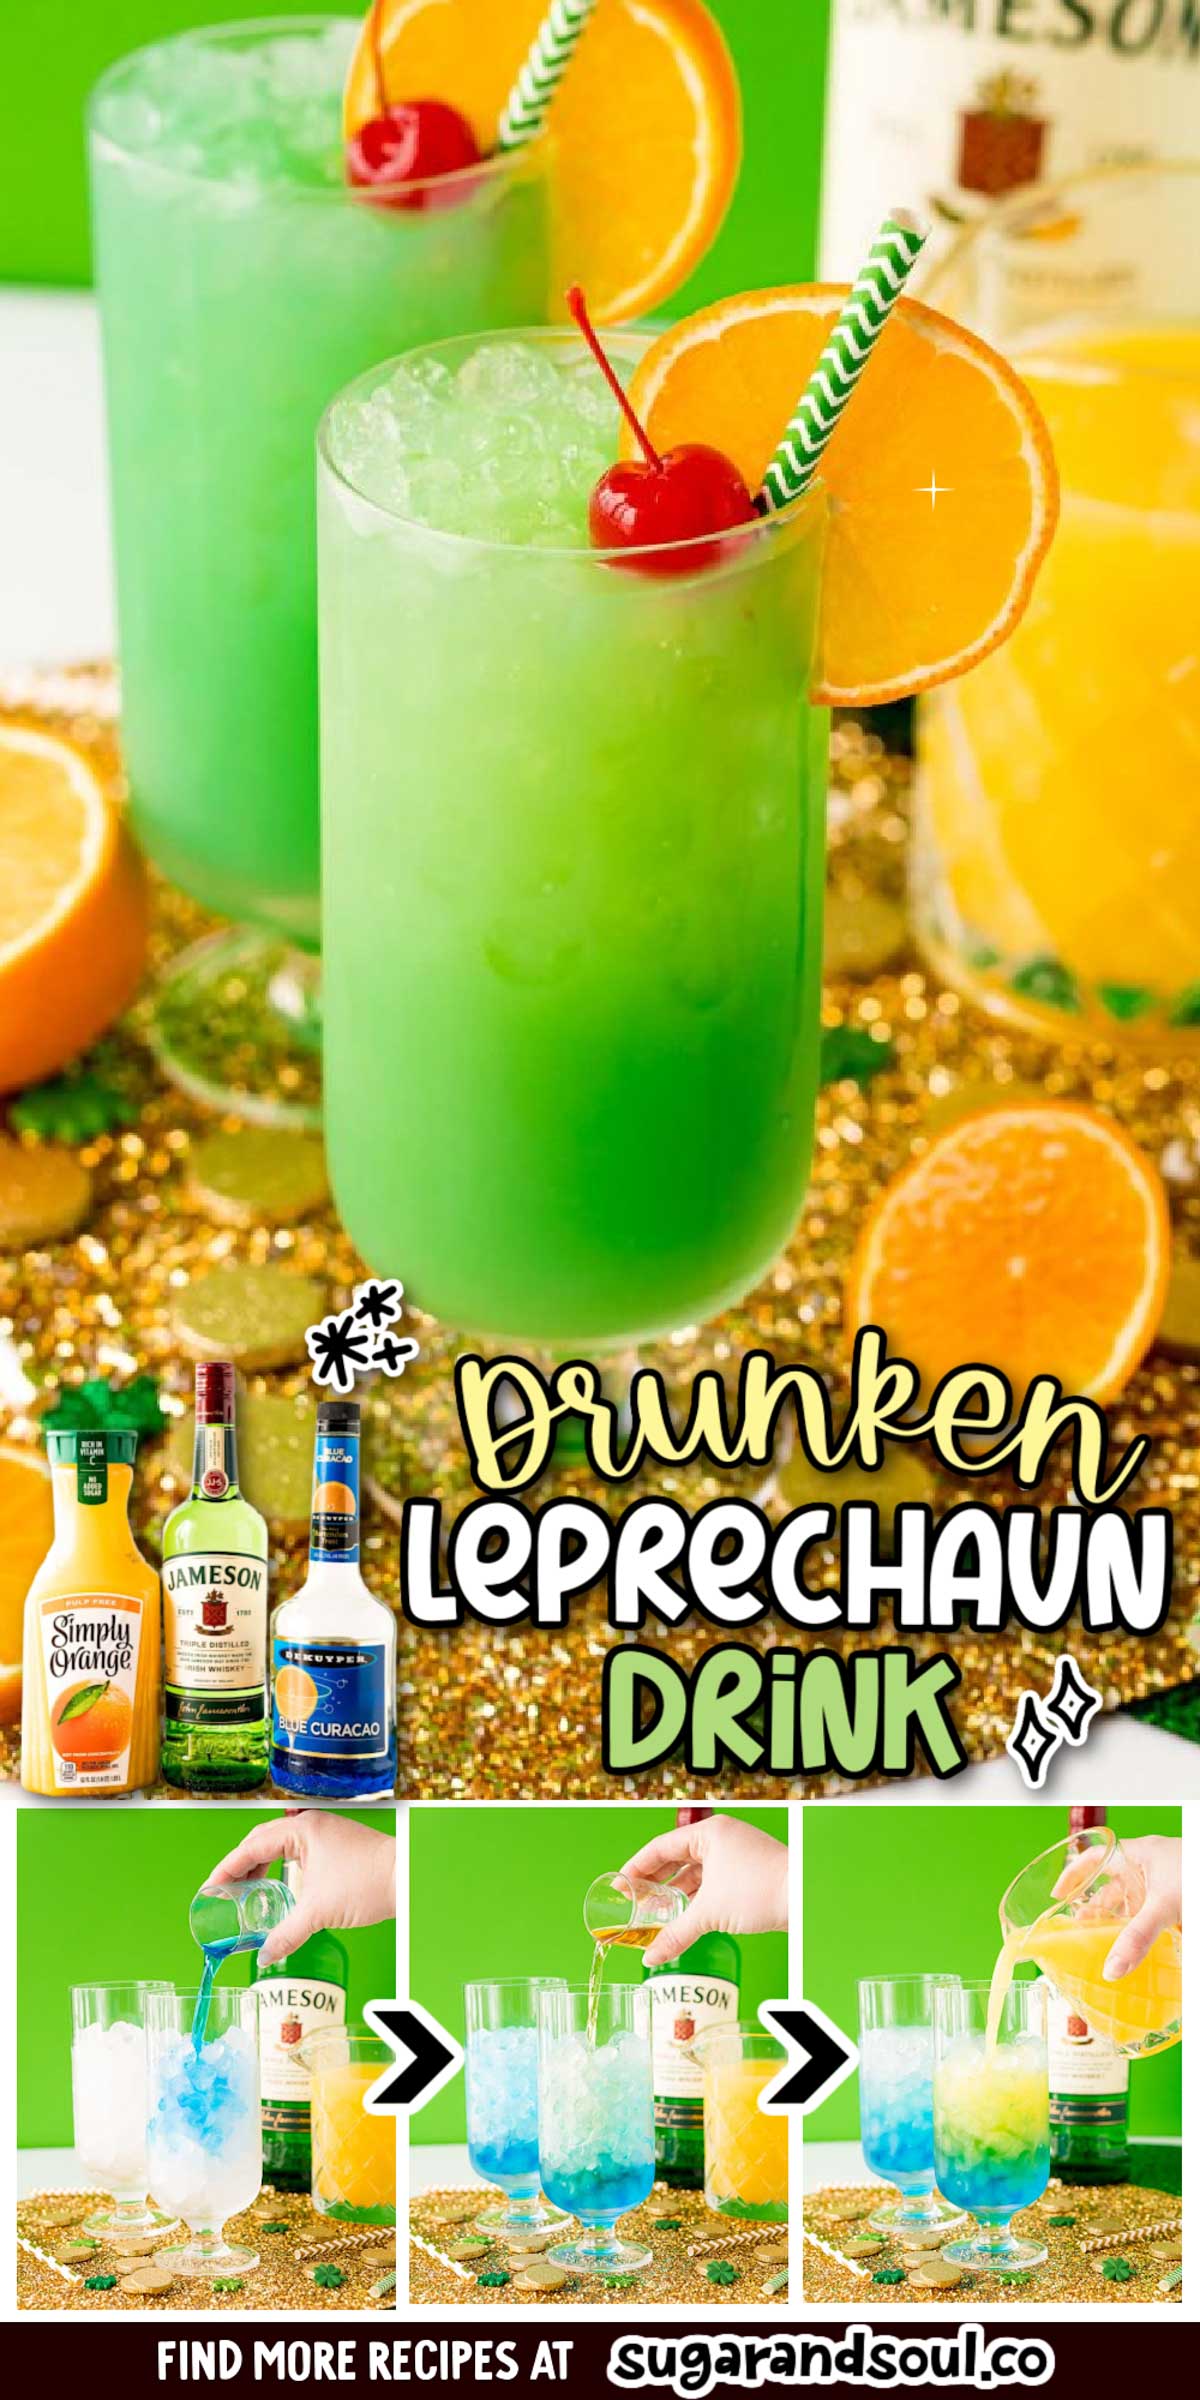 Drunken Leprechaun is a sweet, fruity, vibrant green cocktail that's made with just 3 ingredients in less than 5 minutes! The perfect drink to sip on and serve at your St. Patrick's Day party! via @sugarandsoulco